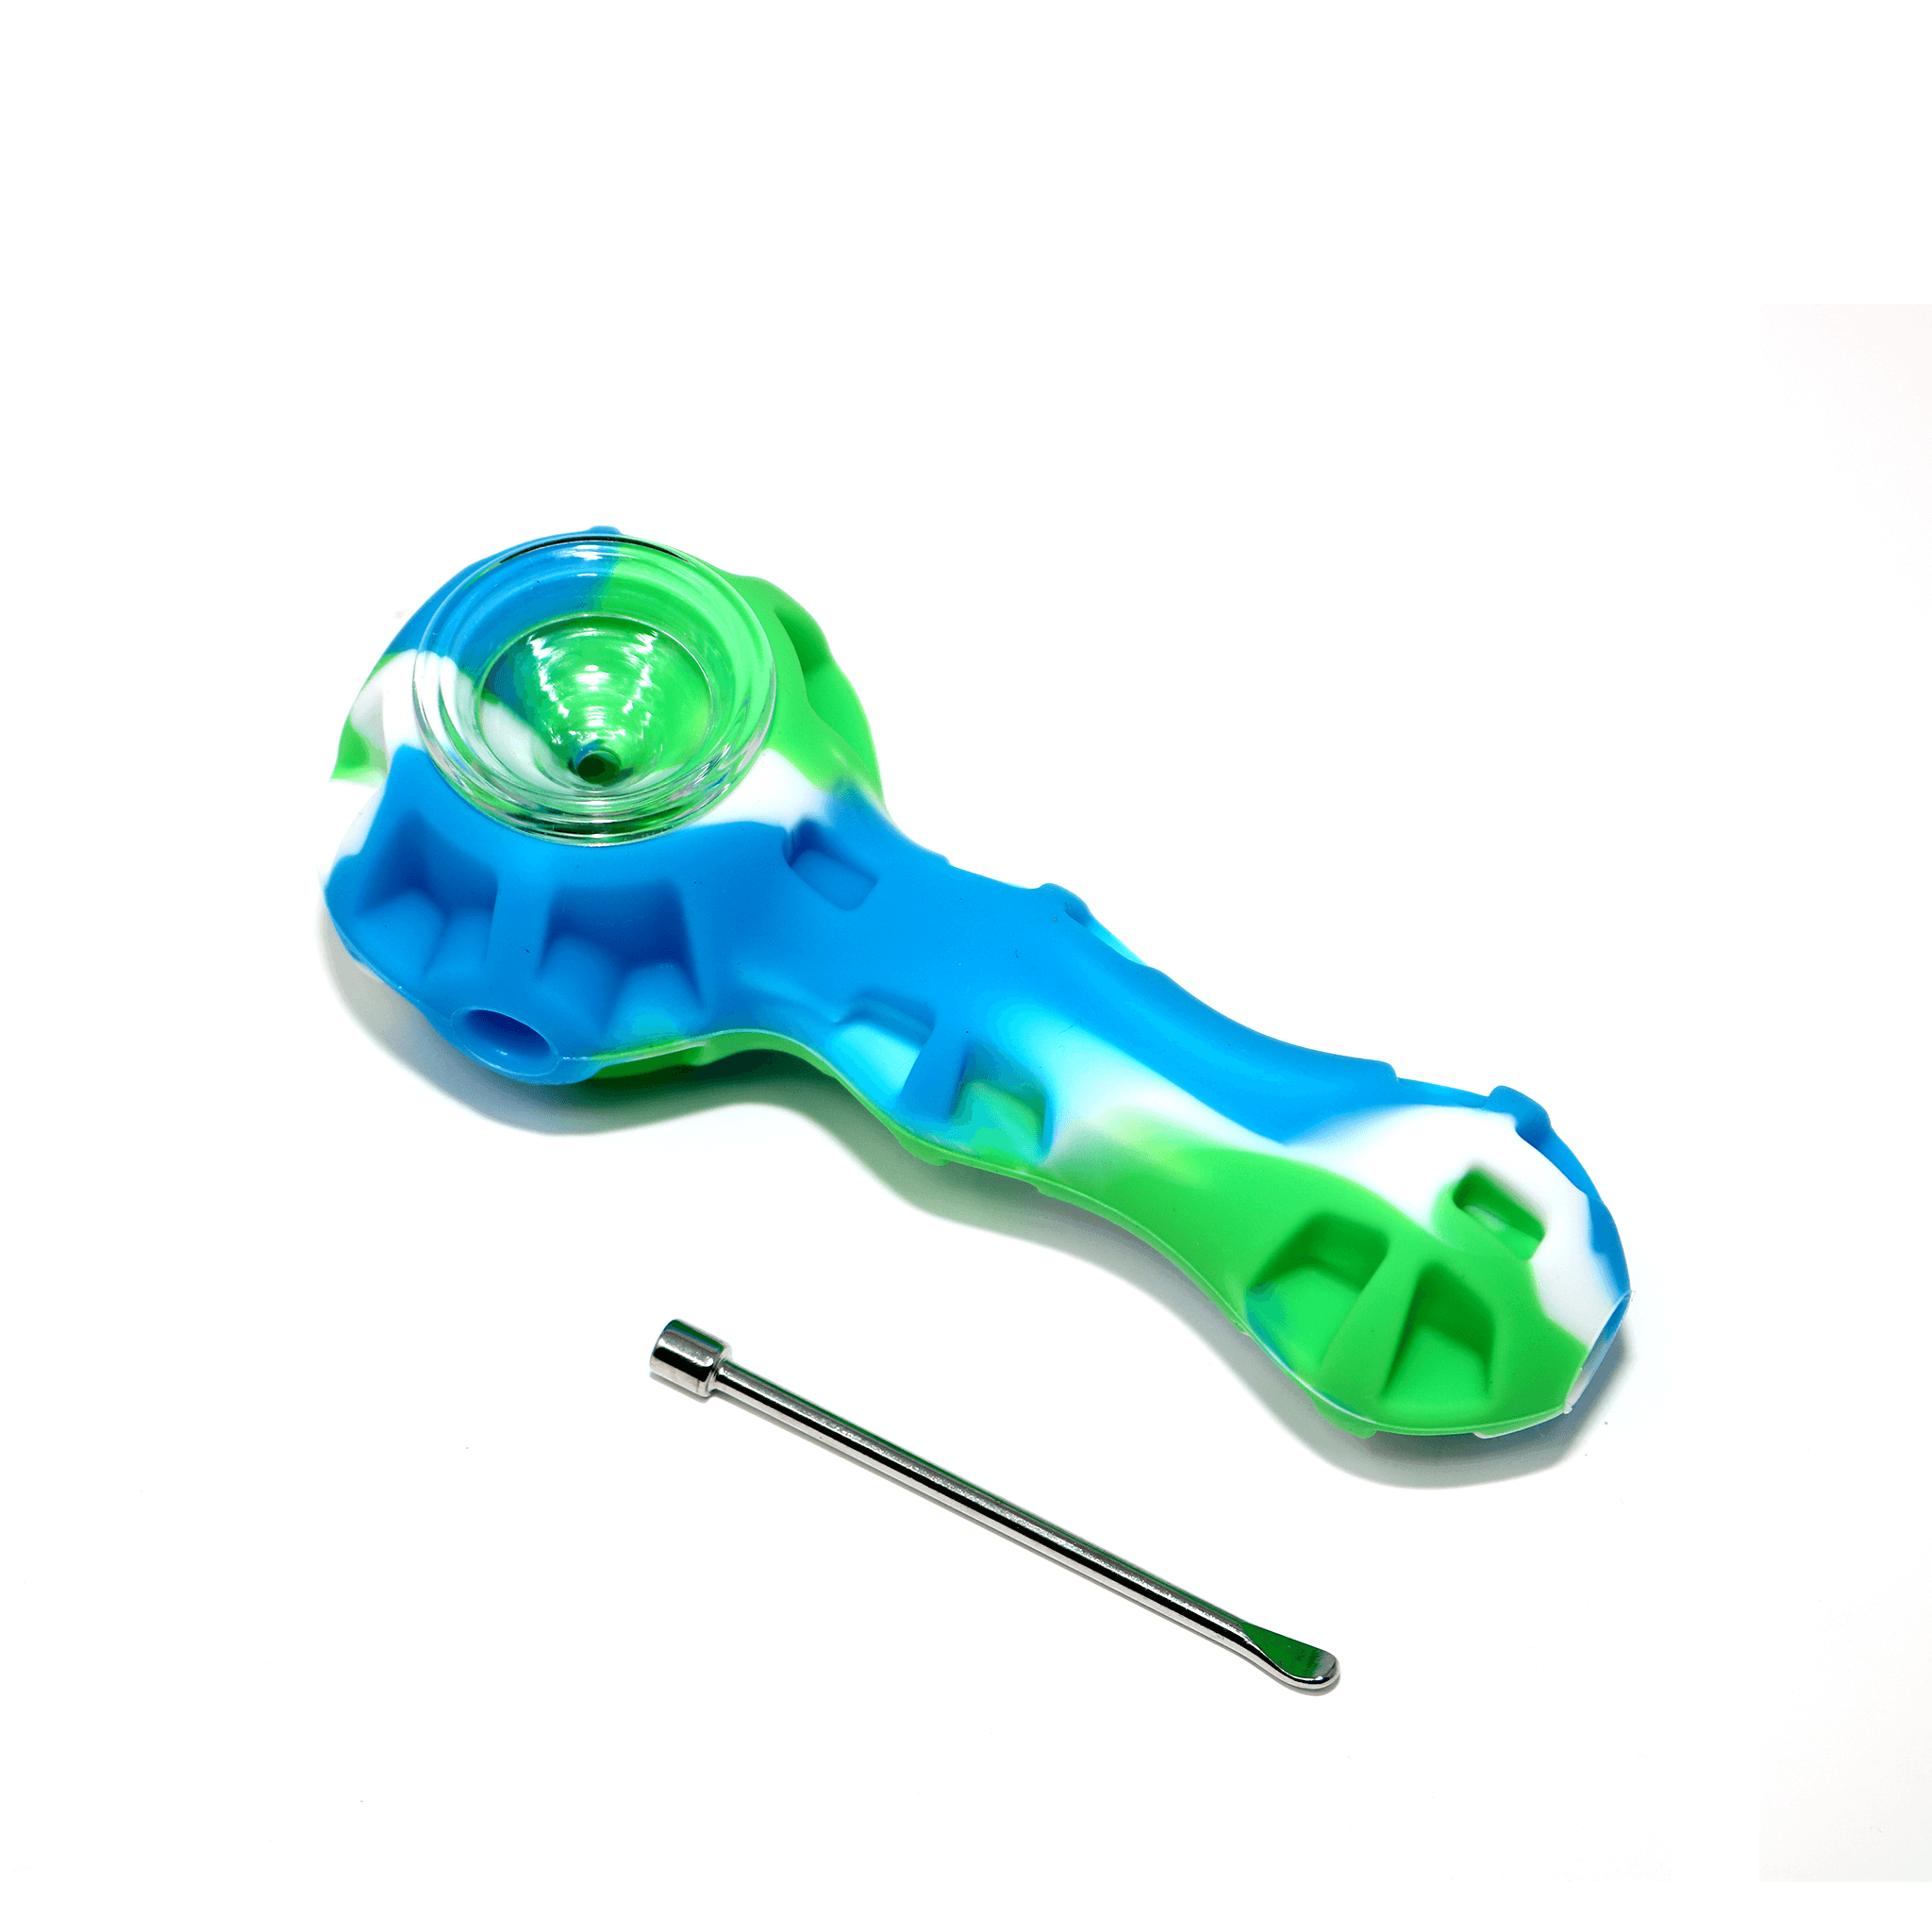 Silicone pipe 10pcs smoking pipe with metal bowl tobacco pipes dry herb  unbreakable percolator spoon pipe